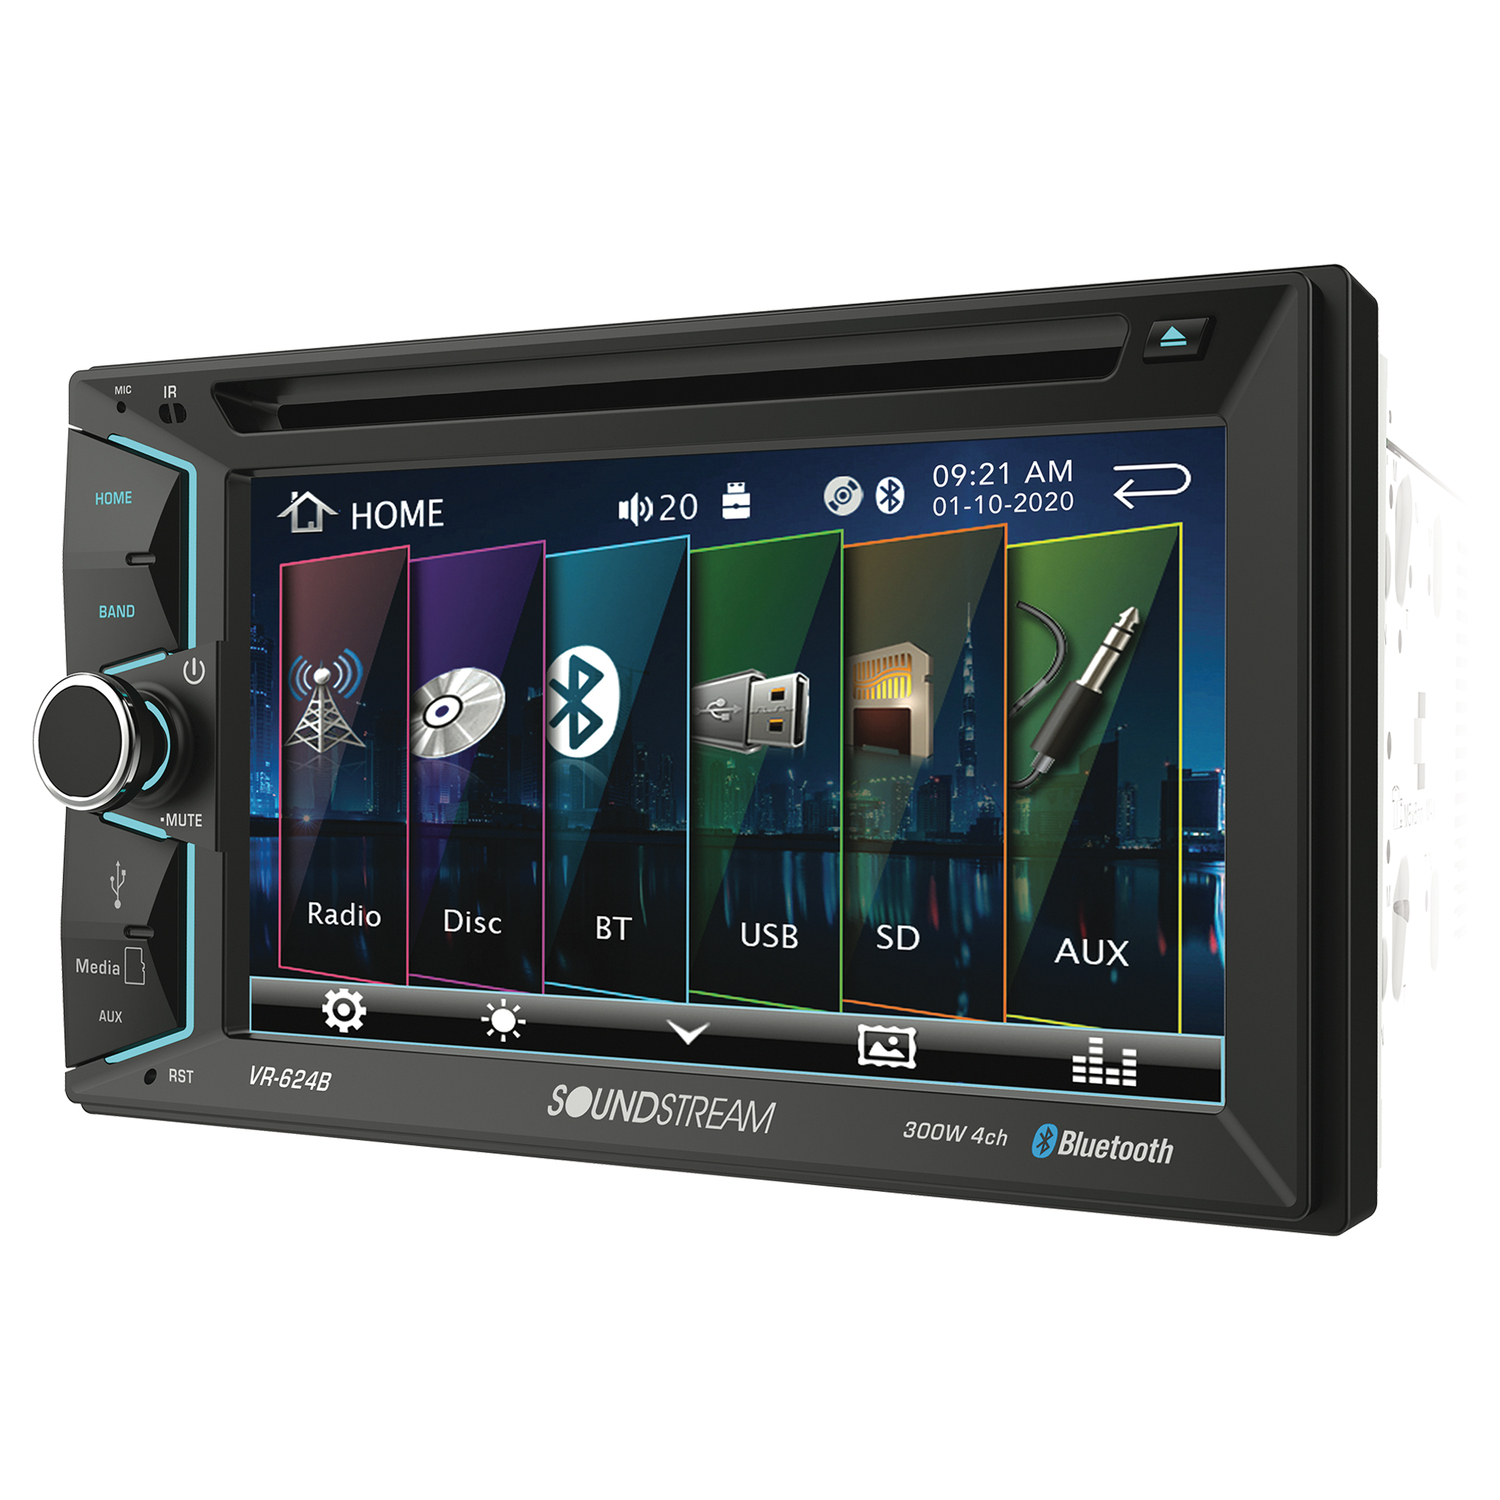 Soundstream VR-624B 6.2" Double-DIN DVD Head Unit with Bluetooth - image 1 of 3